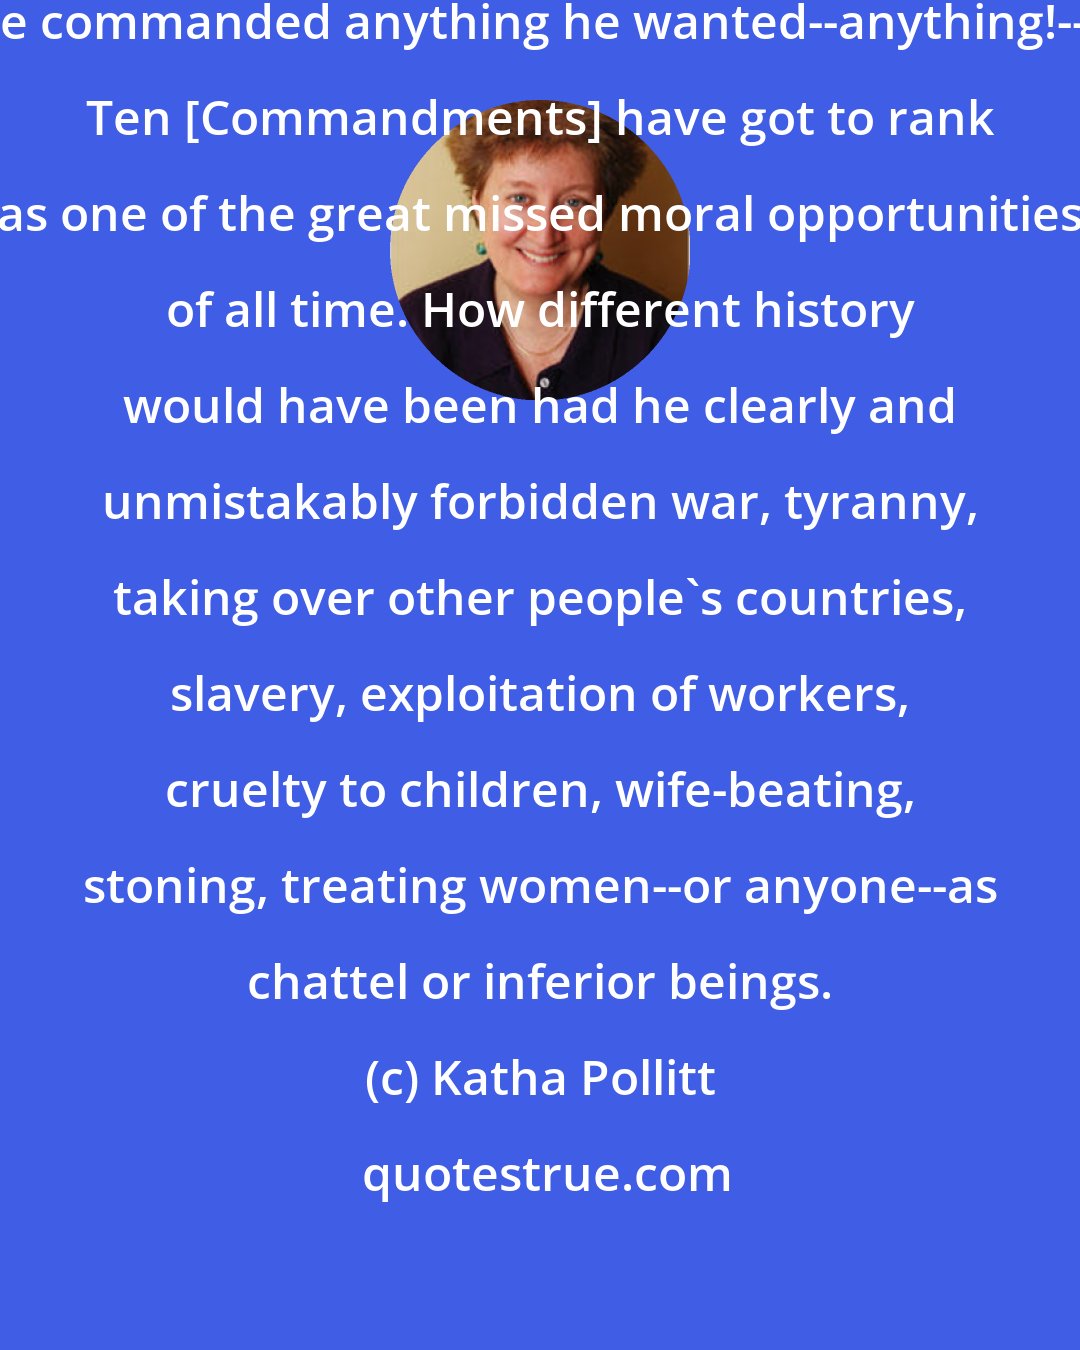 Katha Pollitt: When you consider that God could have commanded anything he wanted--anything!--the Ten [Commandments] have got to rank as one of the great missed moral opportunities of all time. How different history would have been had he clearly and unmistakably forbidden war, tyranny, taking over other people's countries, slavery, exploitation of workers, cruelty to children, wife-beating, stoning, treating women--or anyone--as chattel or inferior beings.